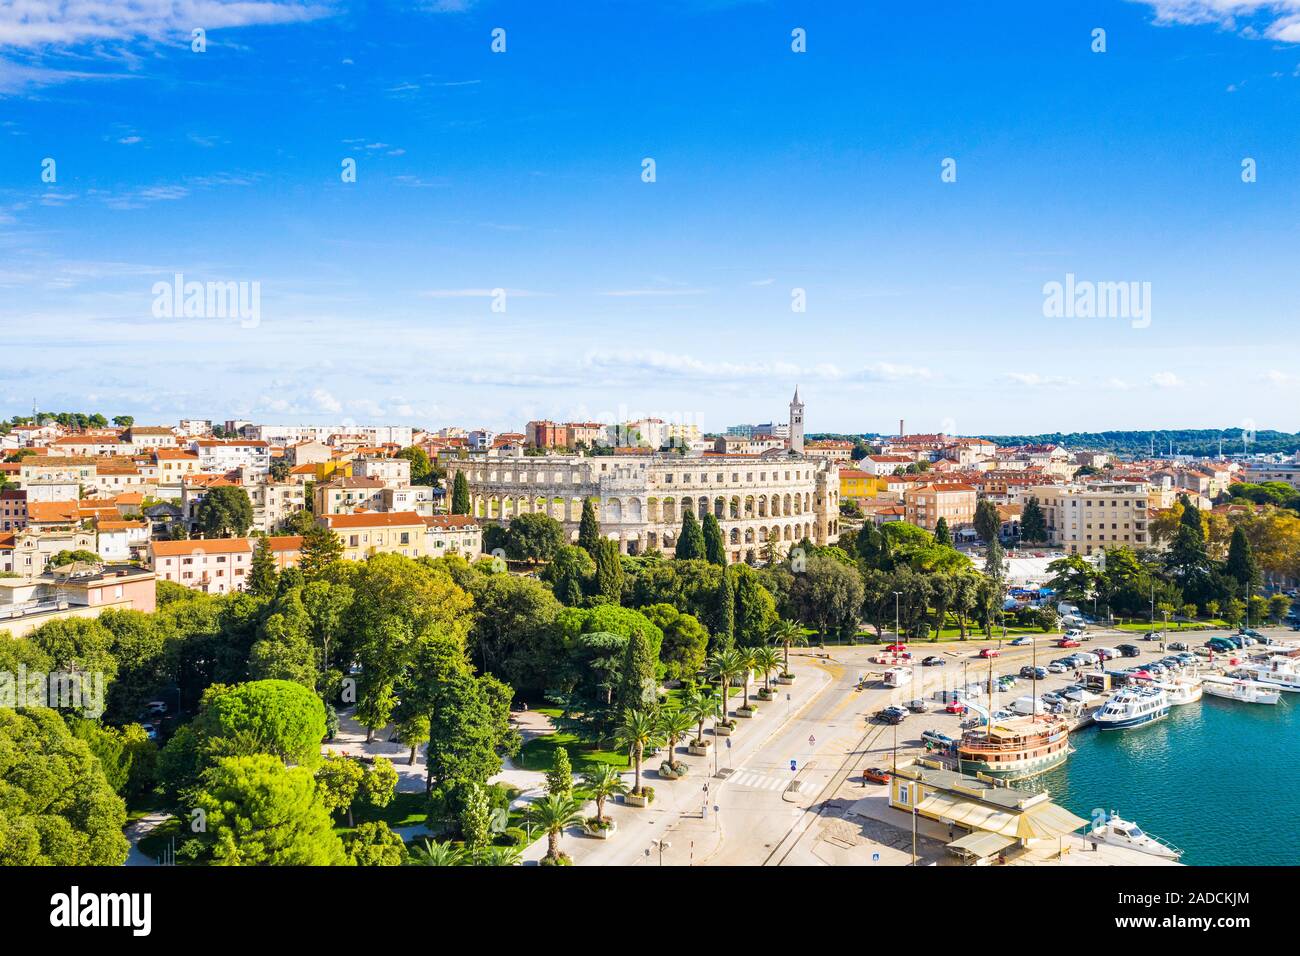 Croatia, Istria, city of Pula, panoramic view of ancient Roman arena, historic amphitheater and old town center from drone Stock Photo